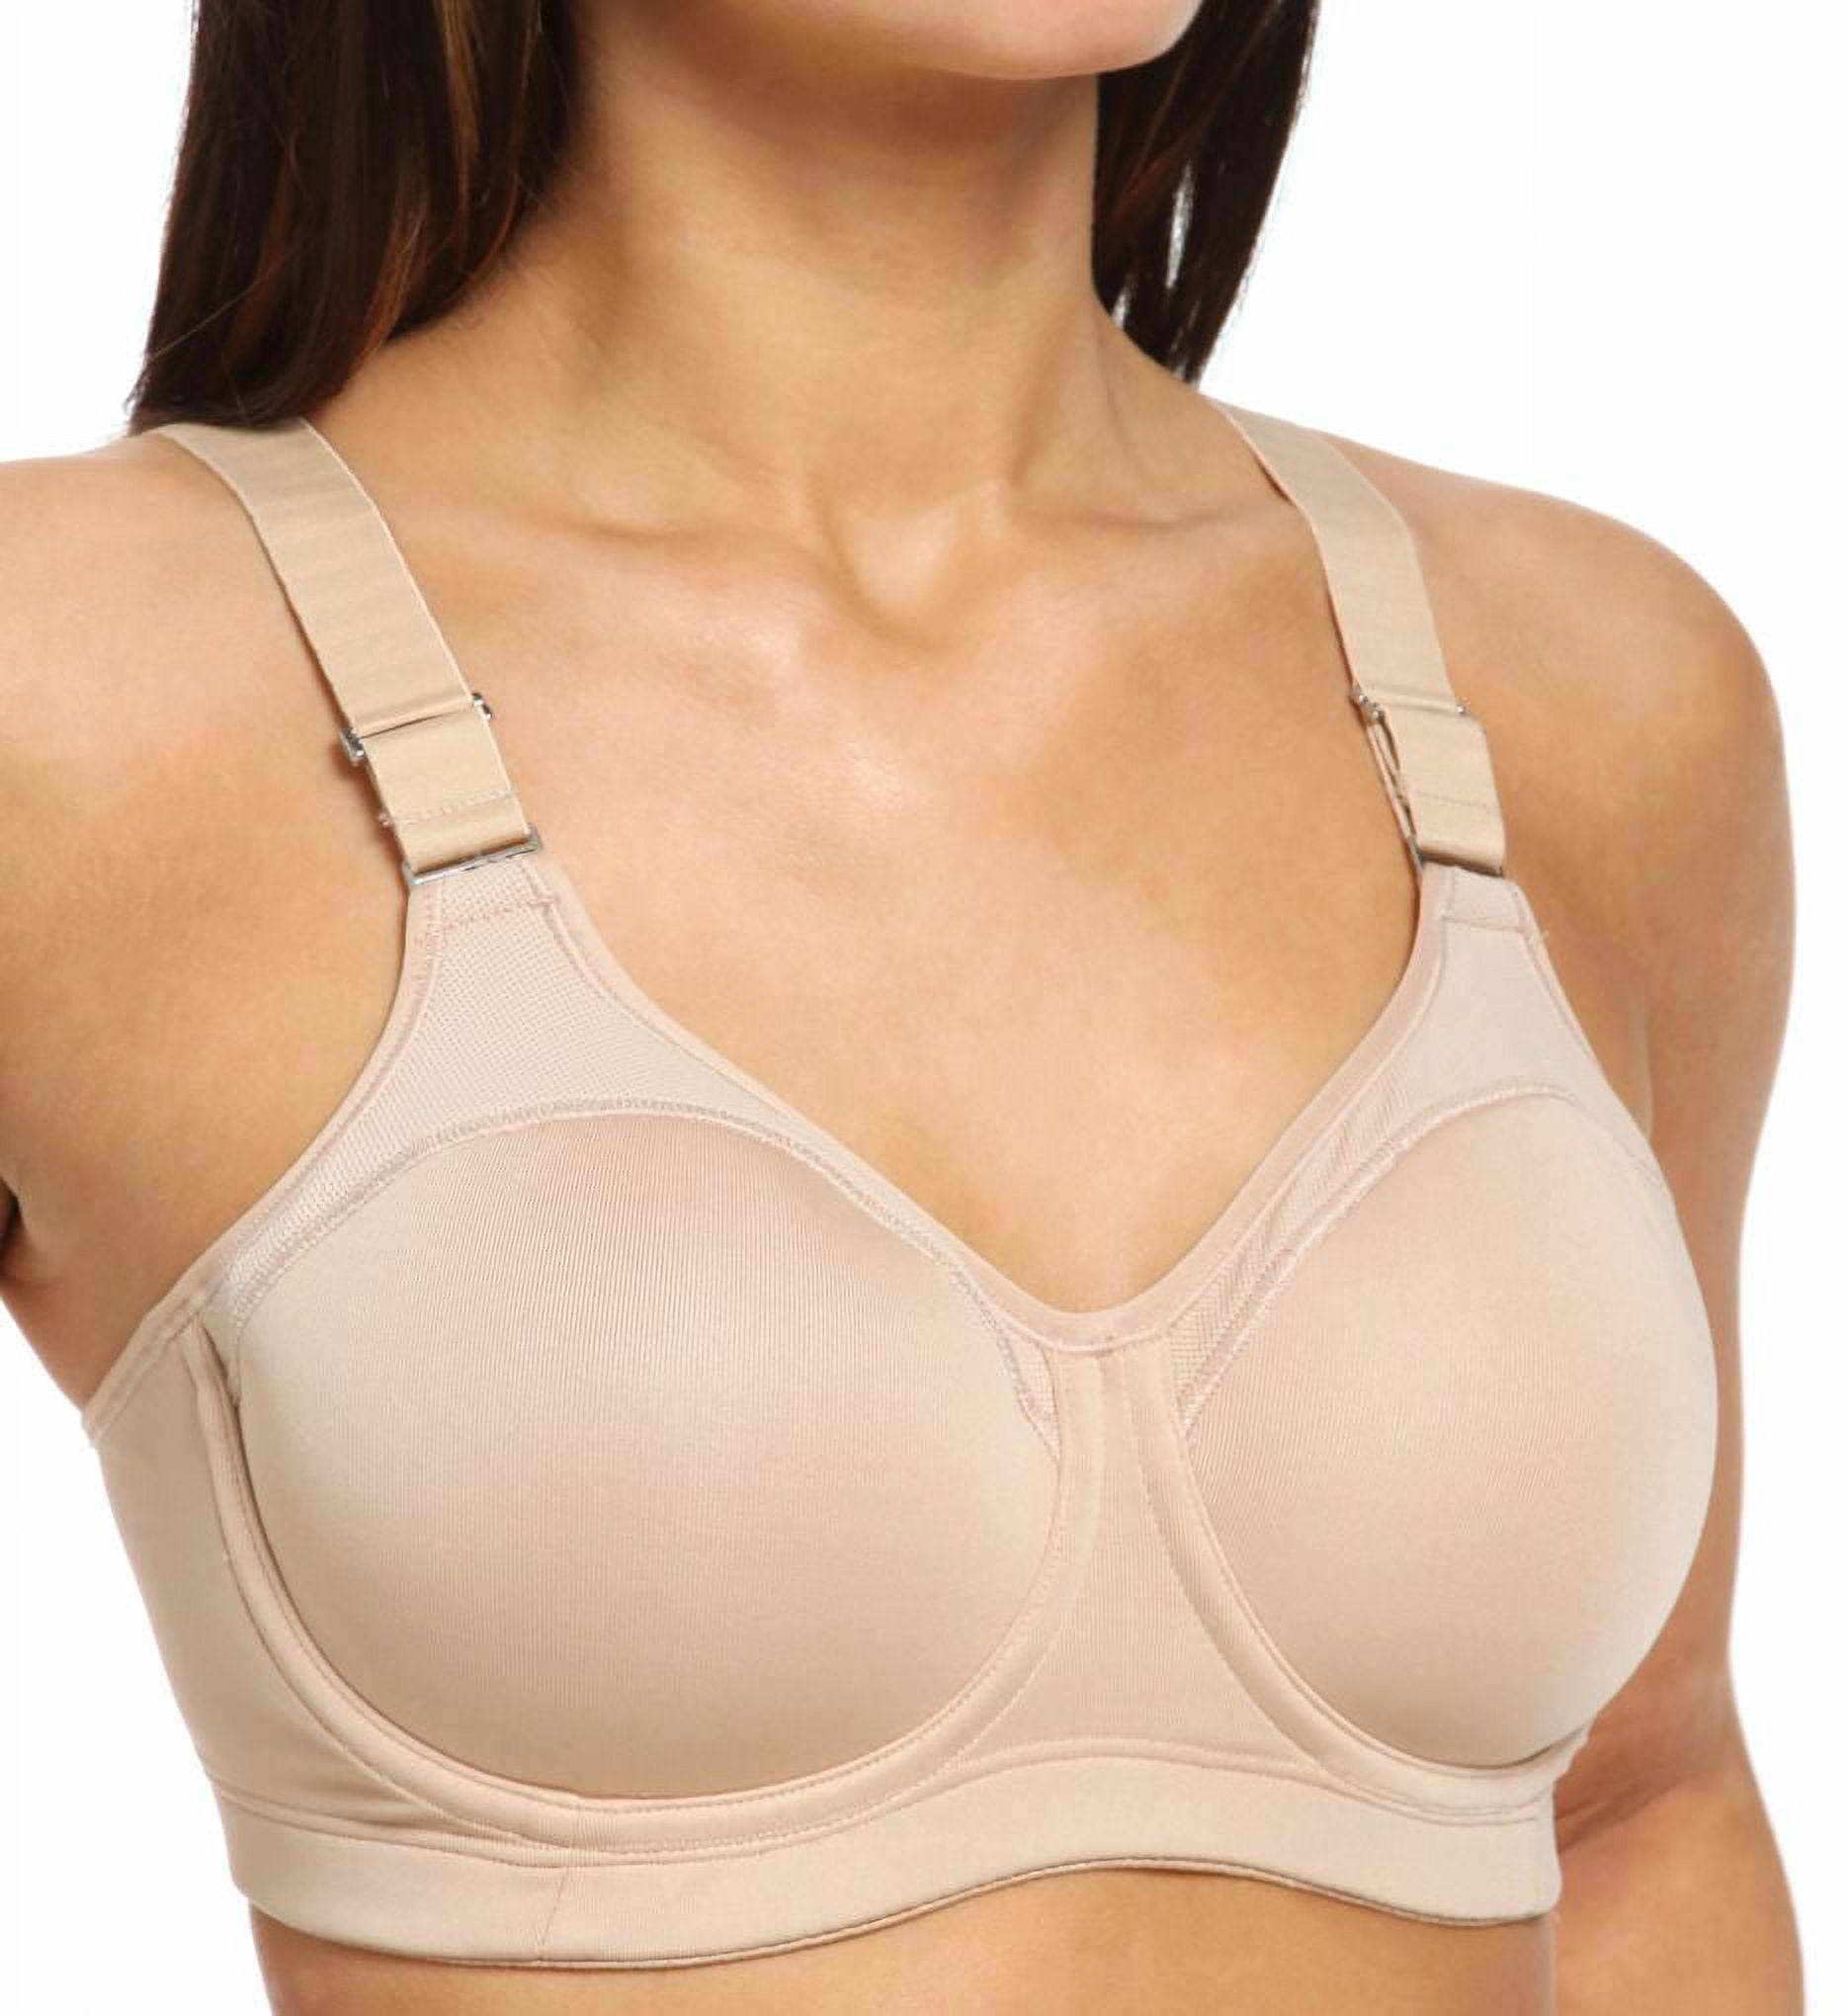 Women's Playtex 4910 Play Outgoer Underwire Sports Bra (Nude M)